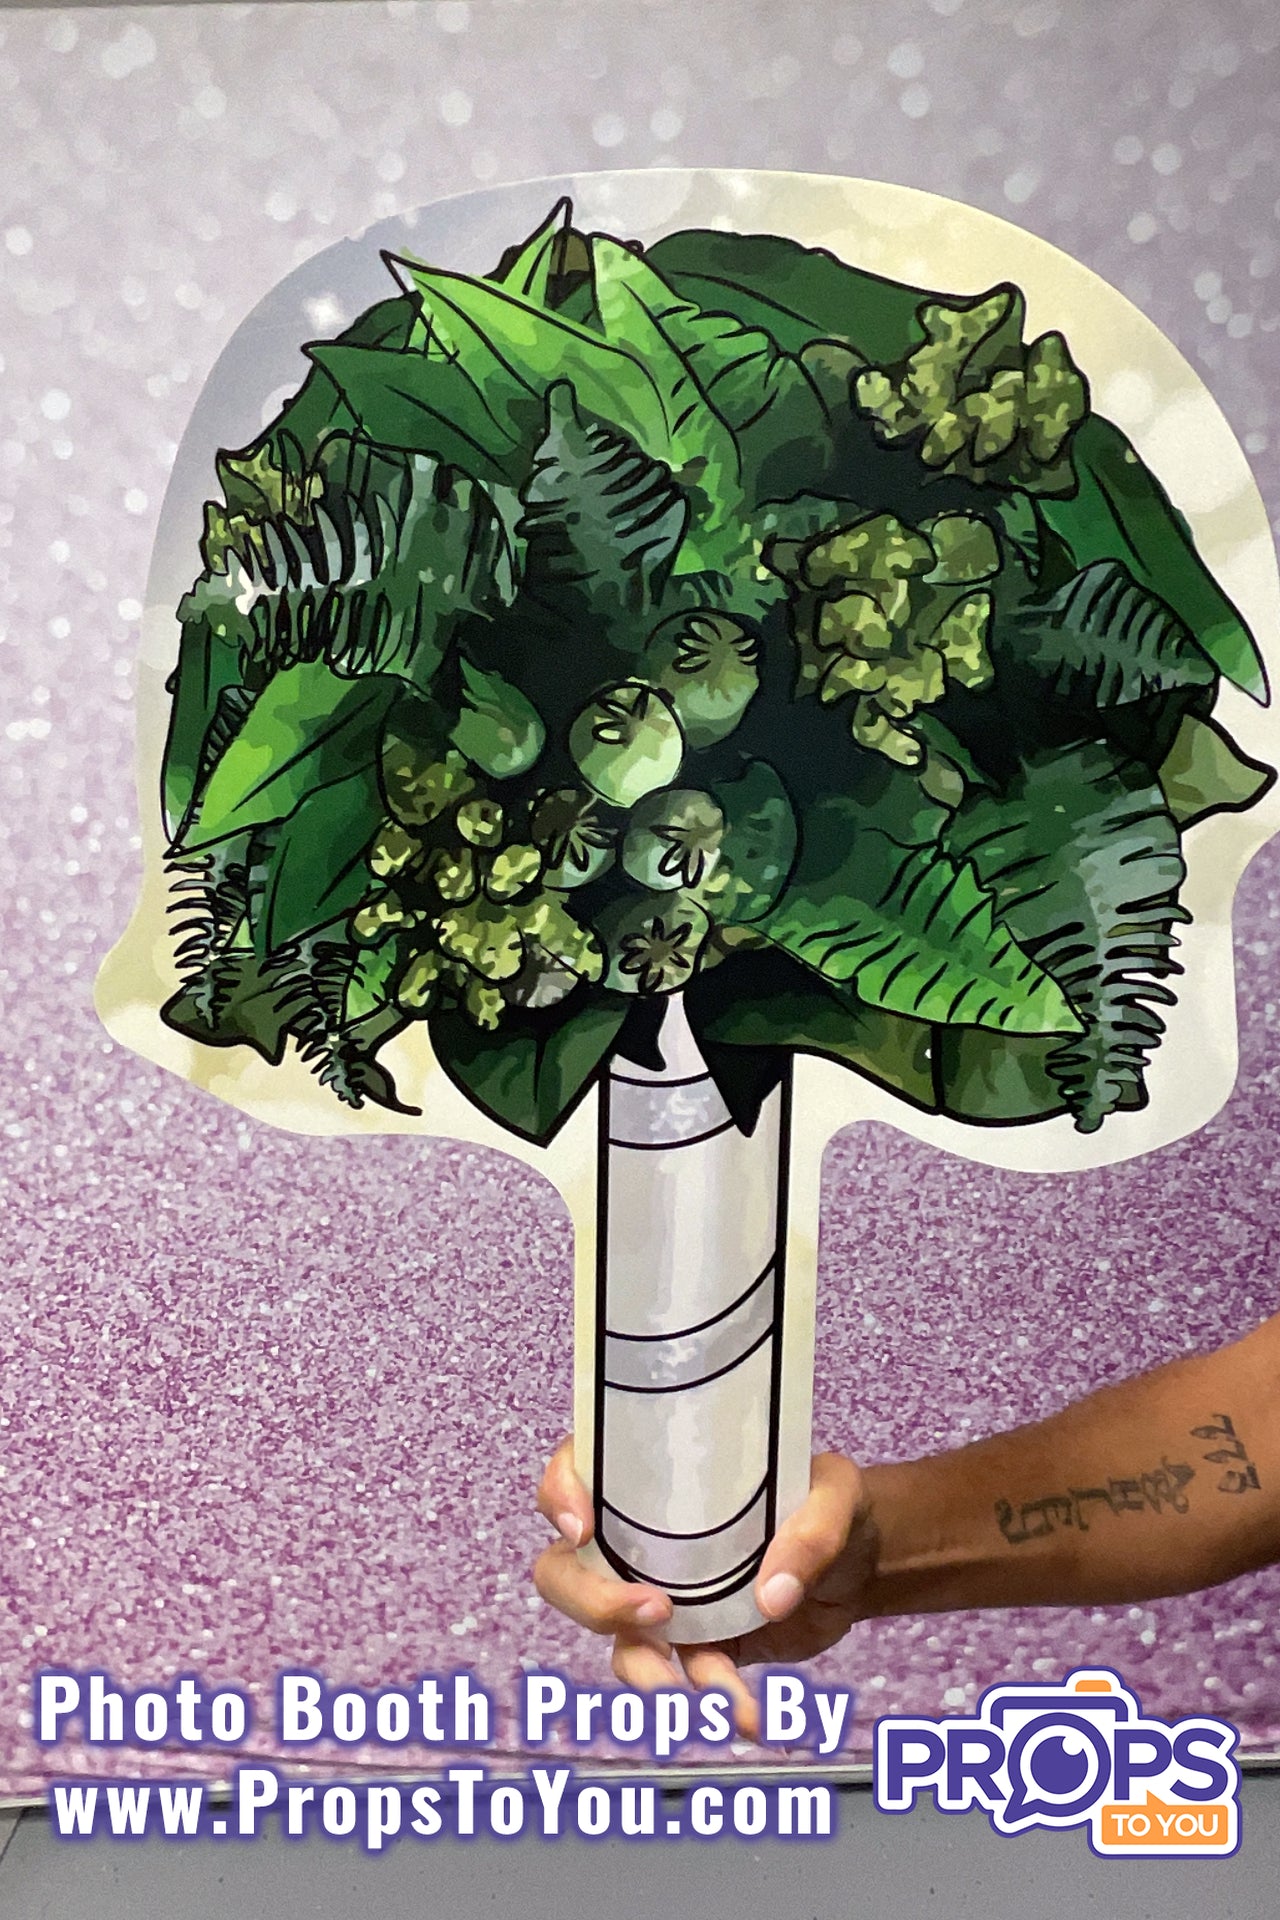 HUGE Props: All Greens/Multi Colored Succulent Bouquet Photo Booth Prop